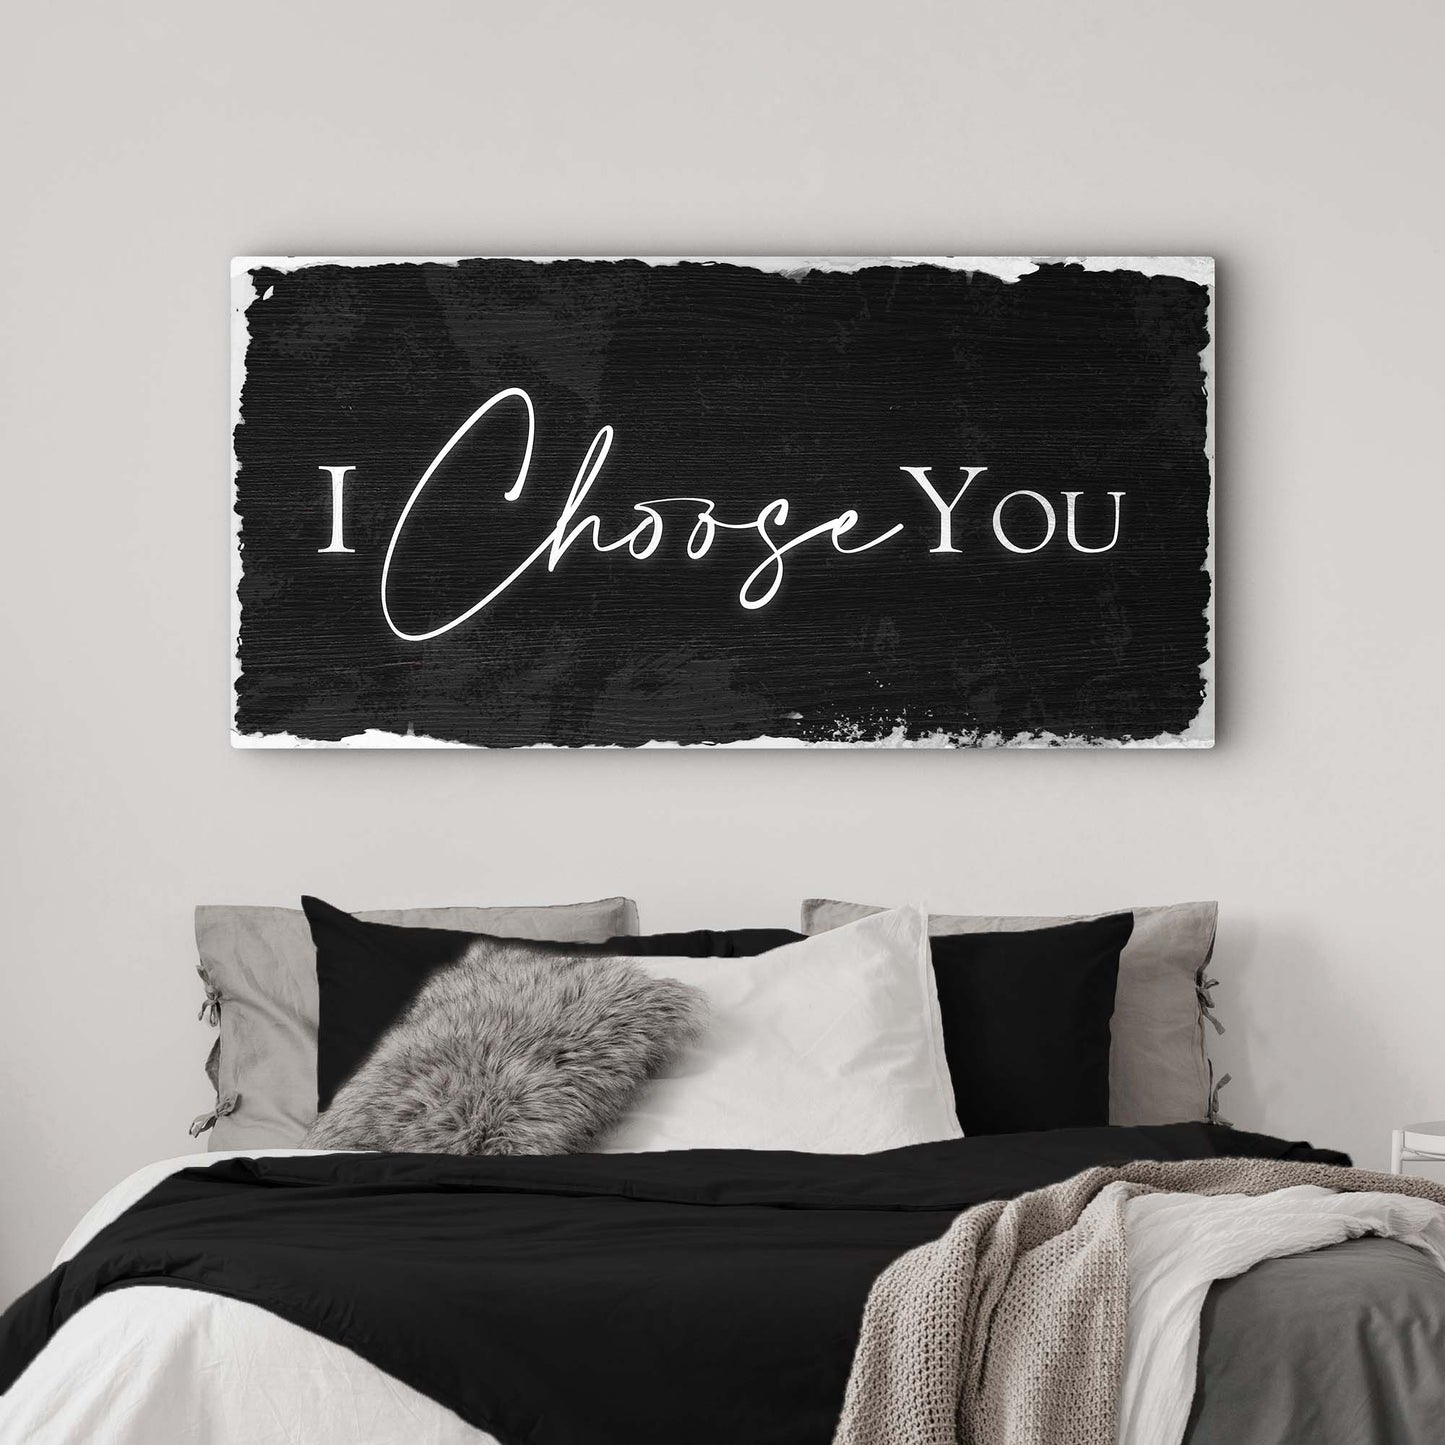 I Choose You Sign - Image by Tailored Canvases